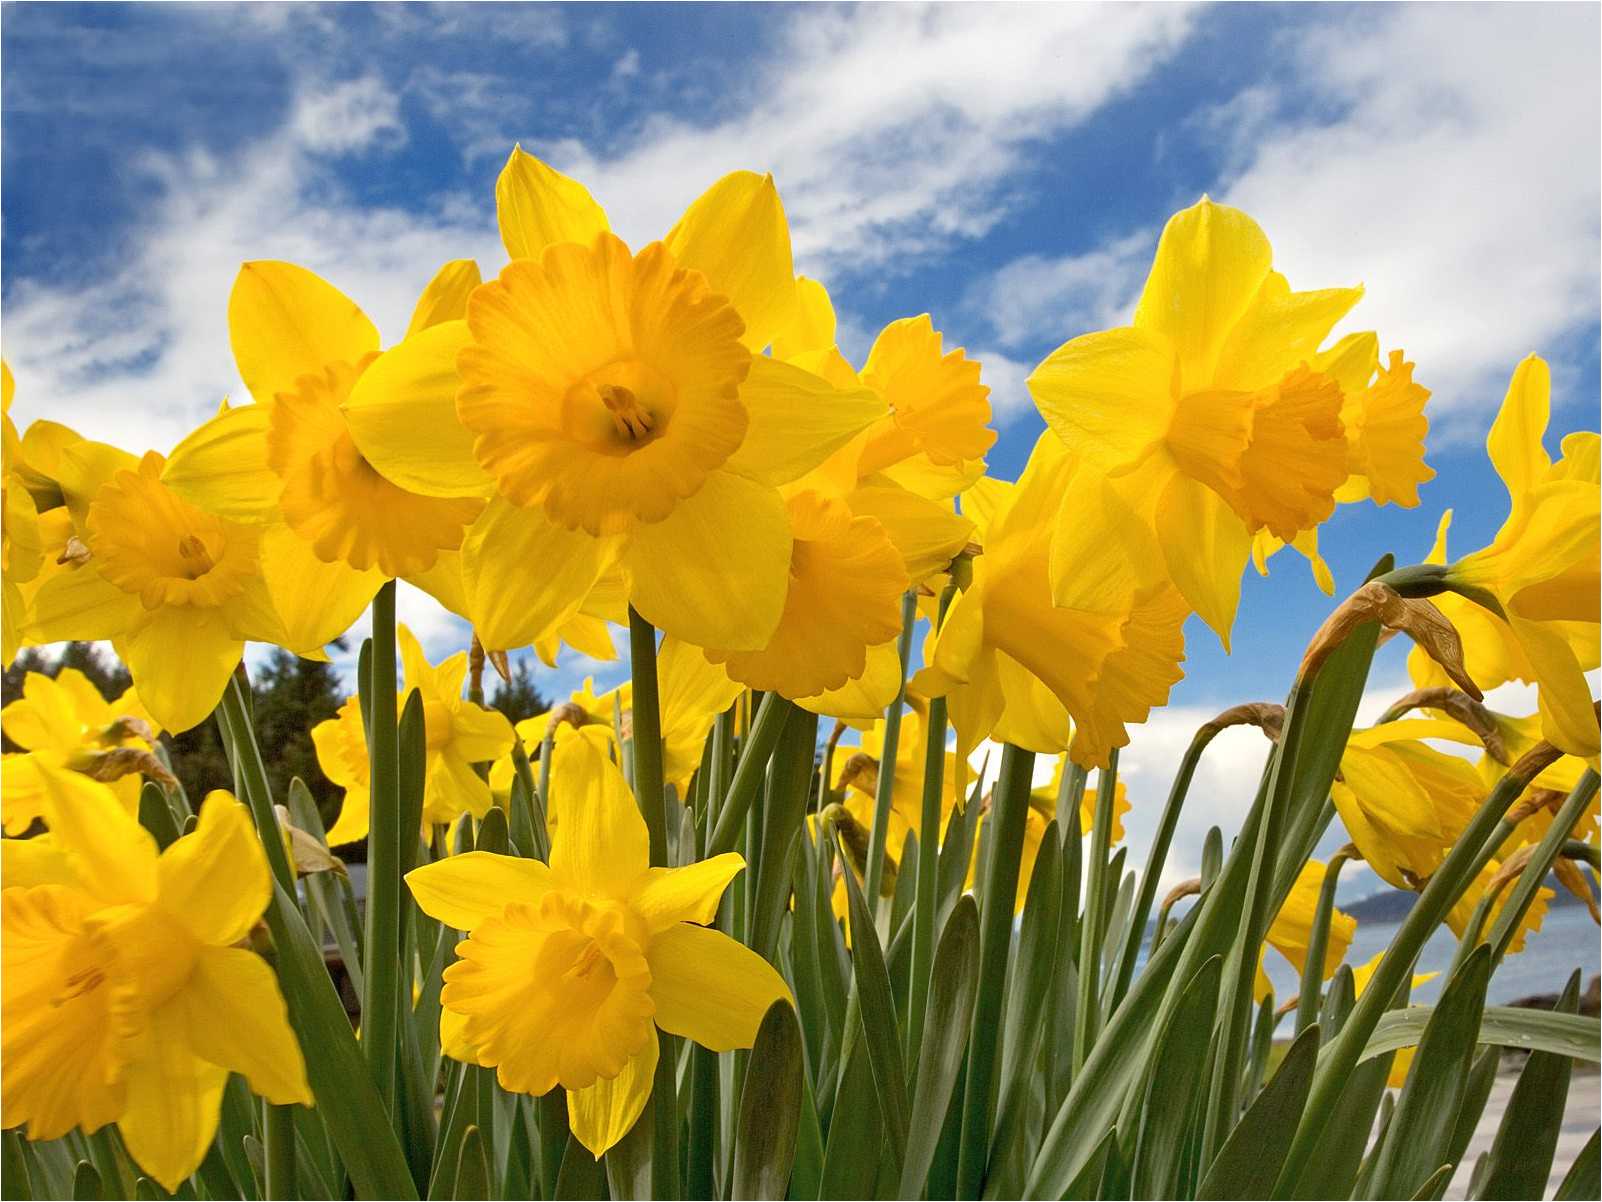 Nature Spring Wallpaper with Yellow Daffodils Flowers Stock Image  Image  of blogging nature 112619755